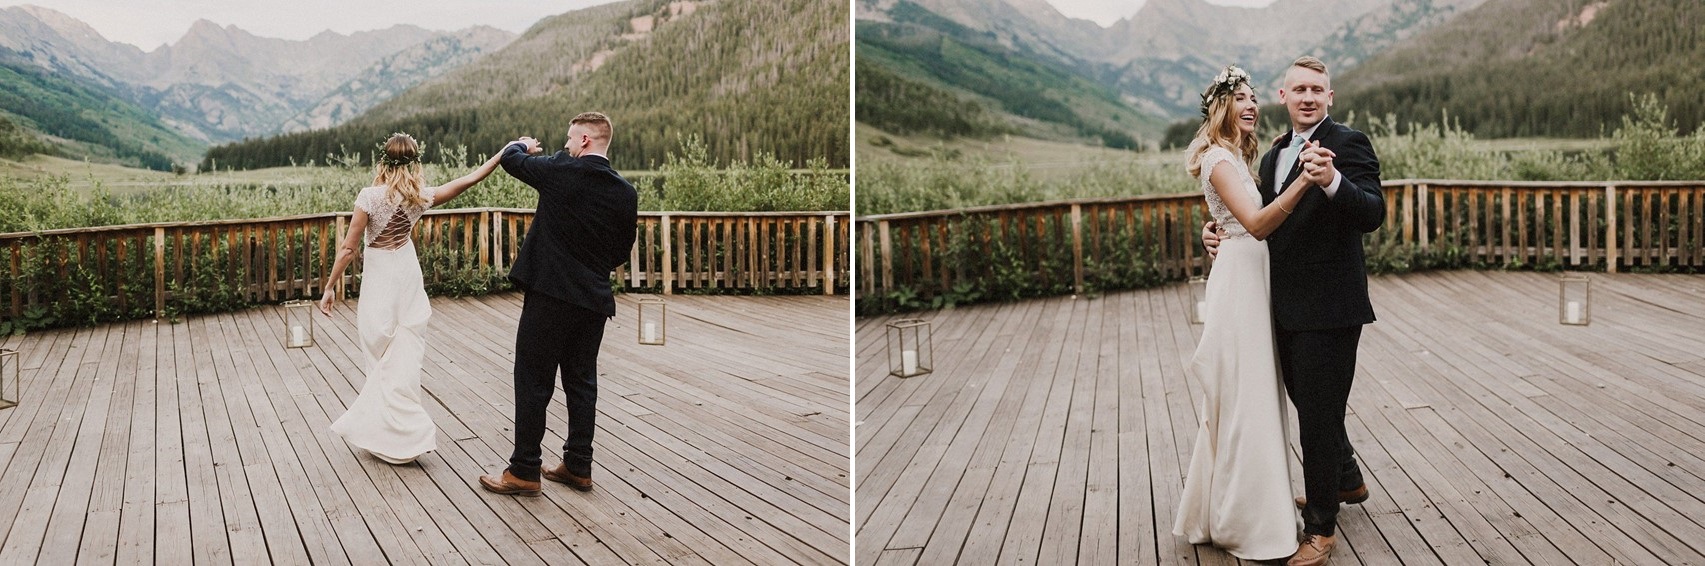 First Dance in the shadow of Mountains